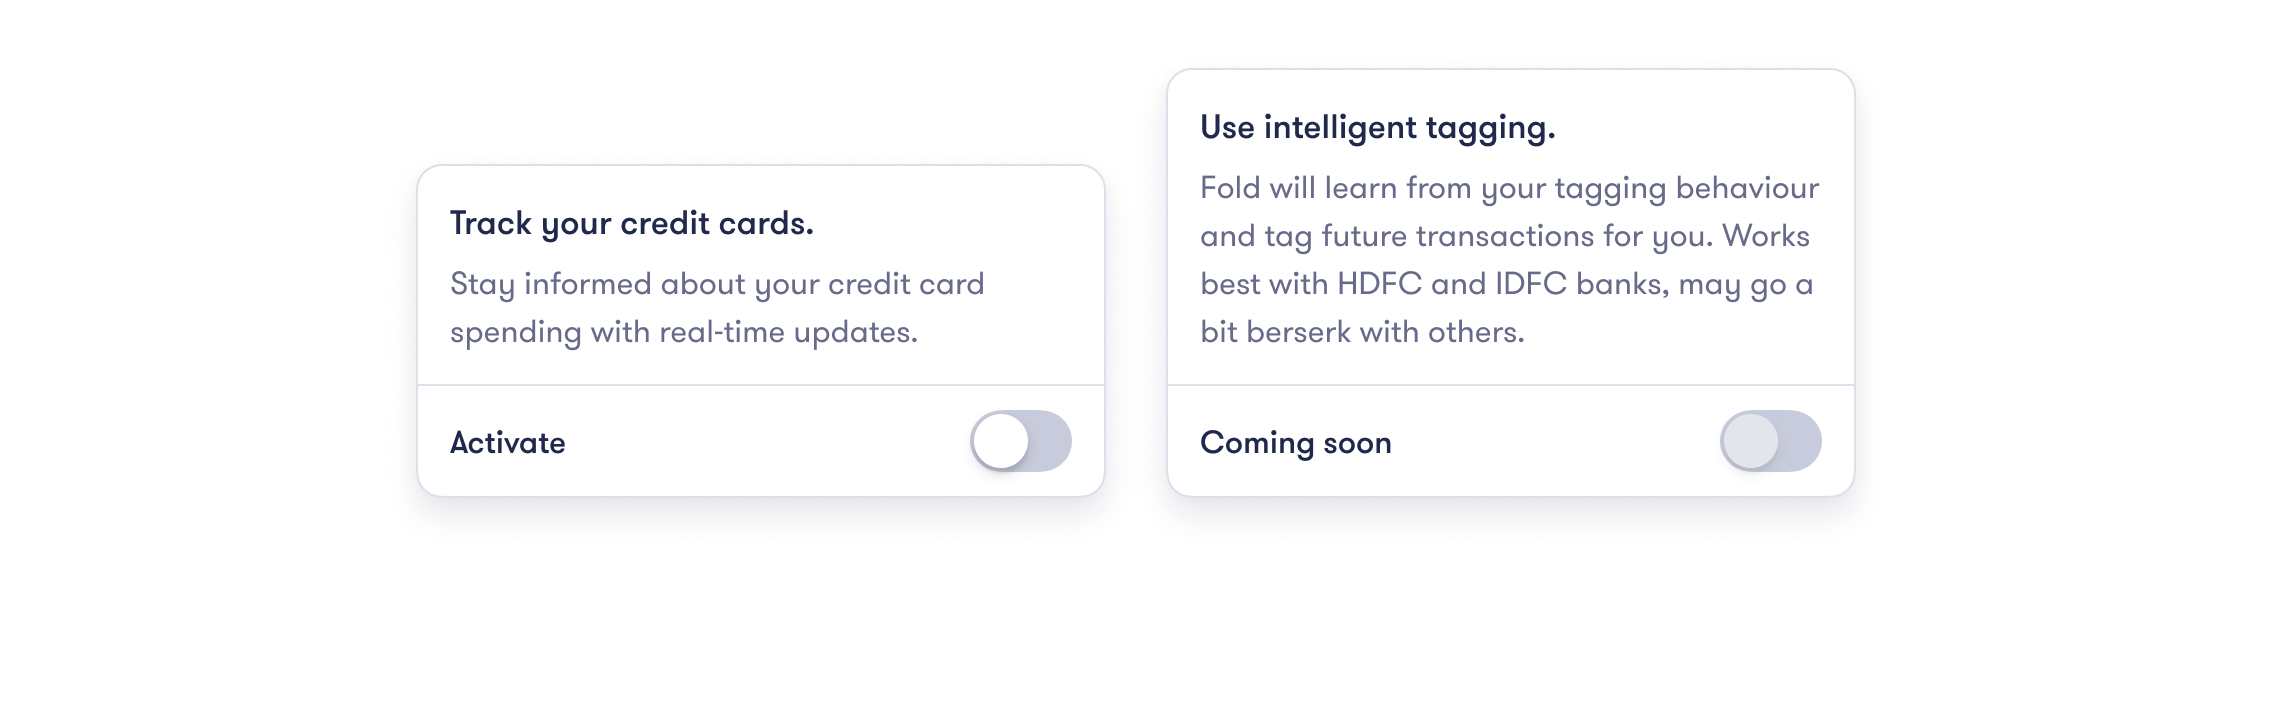 Screenshot of two upcoming features "Track your credit card" and "use auto tagging" with subtext with explanation. each feature has Activate toggle which can be used to enable it.